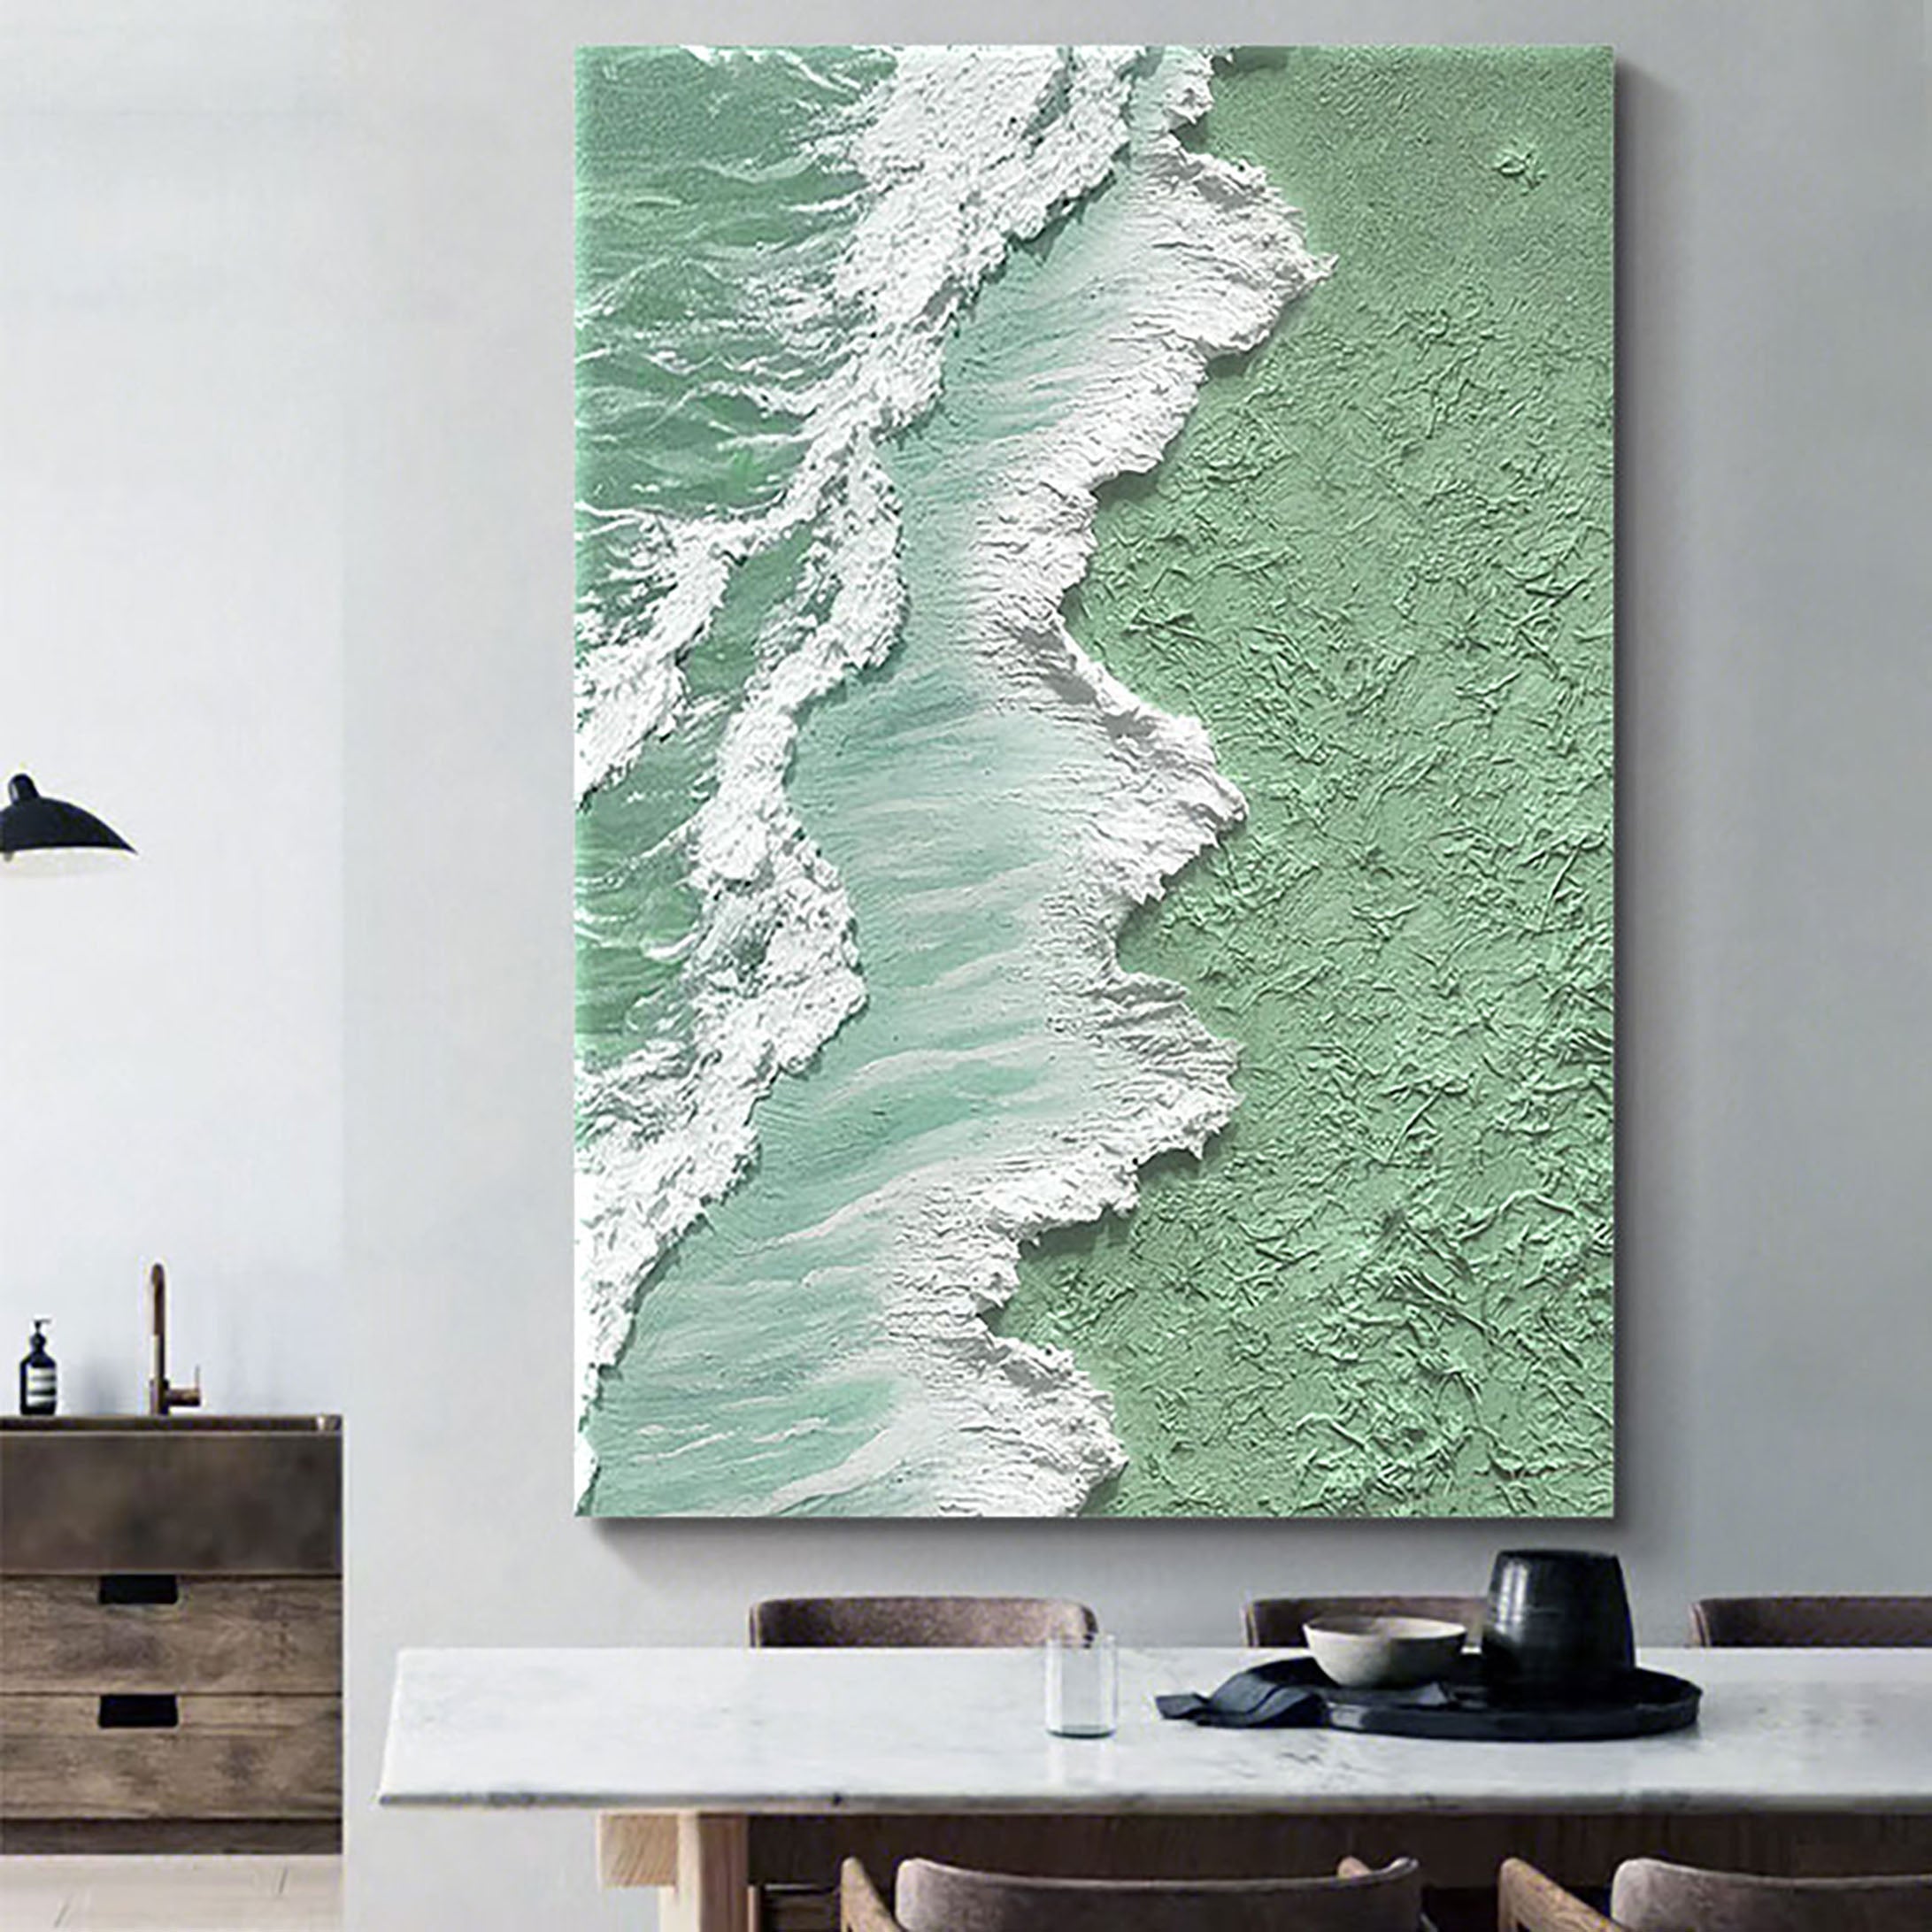 Ocean And Sky Painting #OS 034